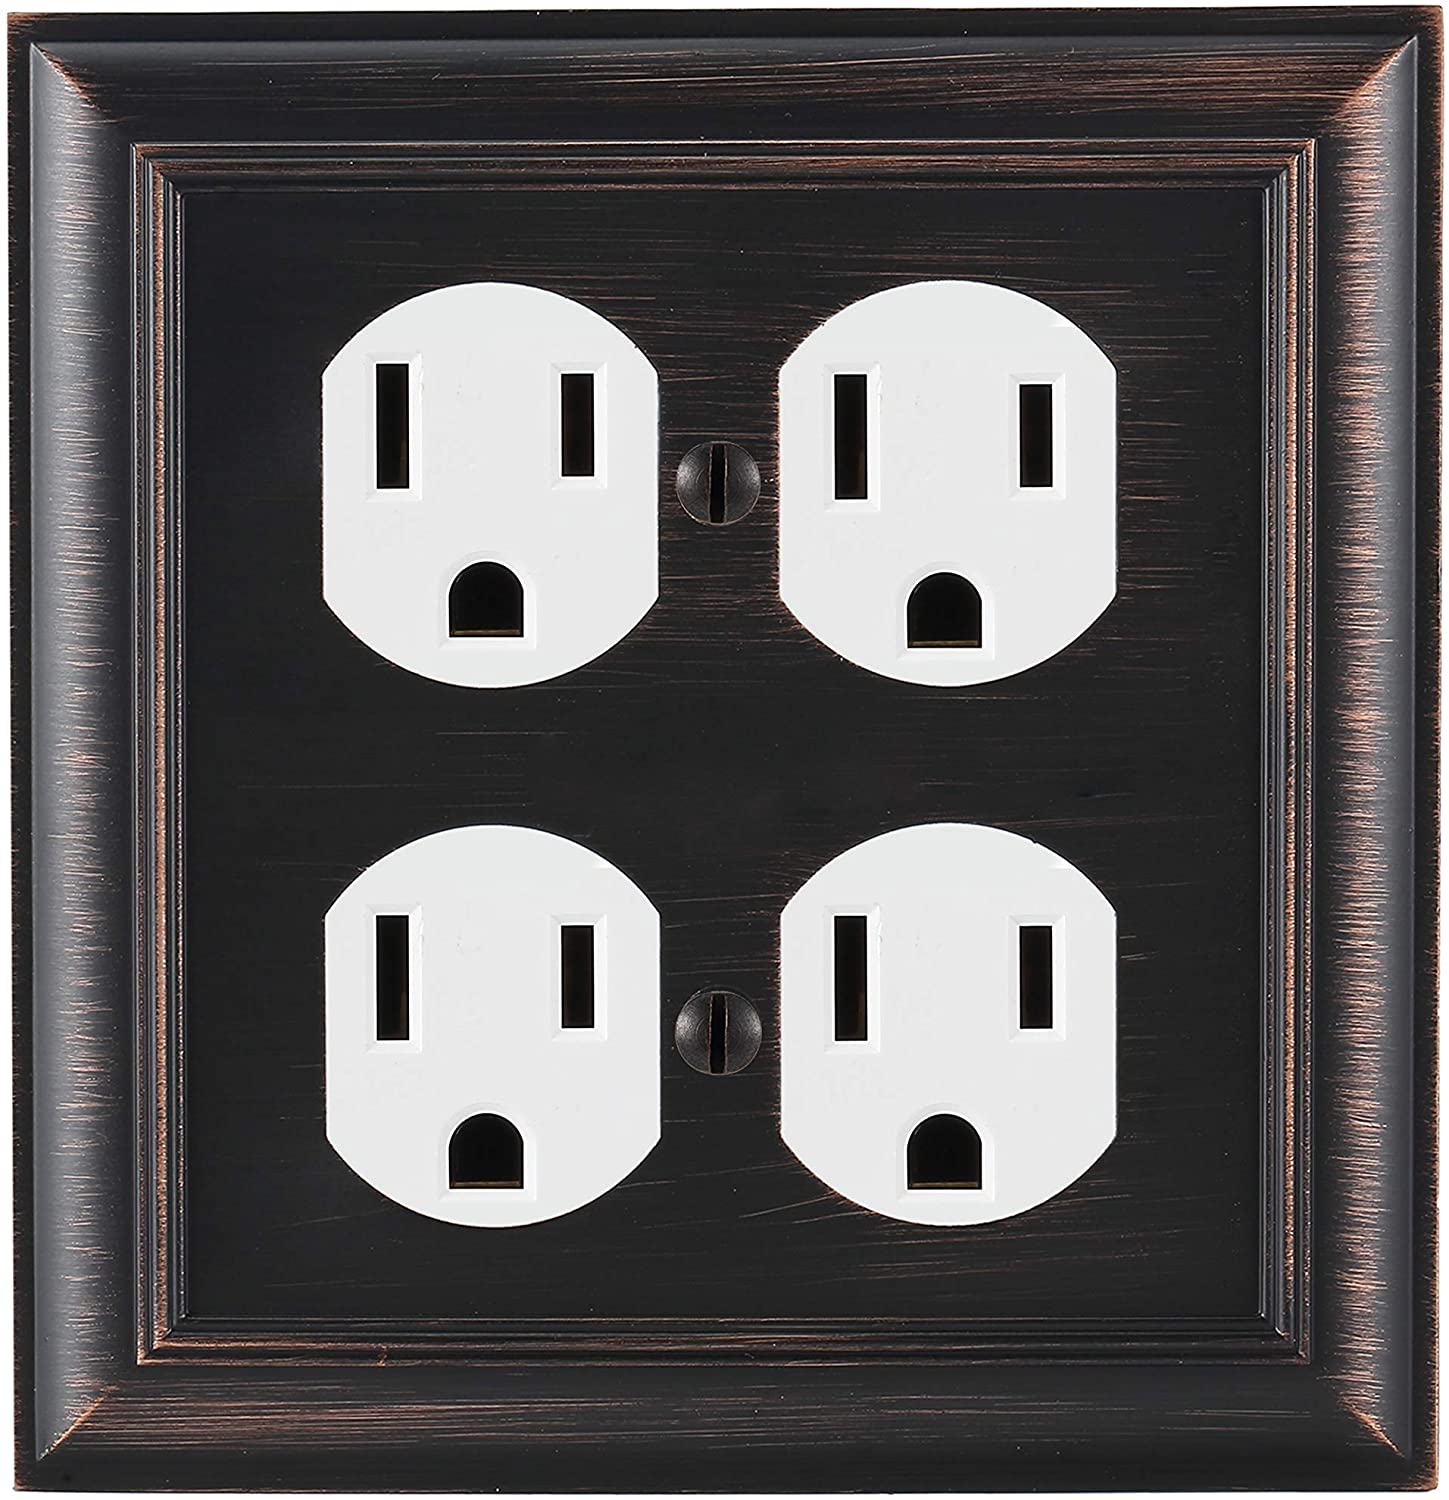 Bates- Double Duplex Wall Plates, Bronze, Wall Plates for Outlets ...